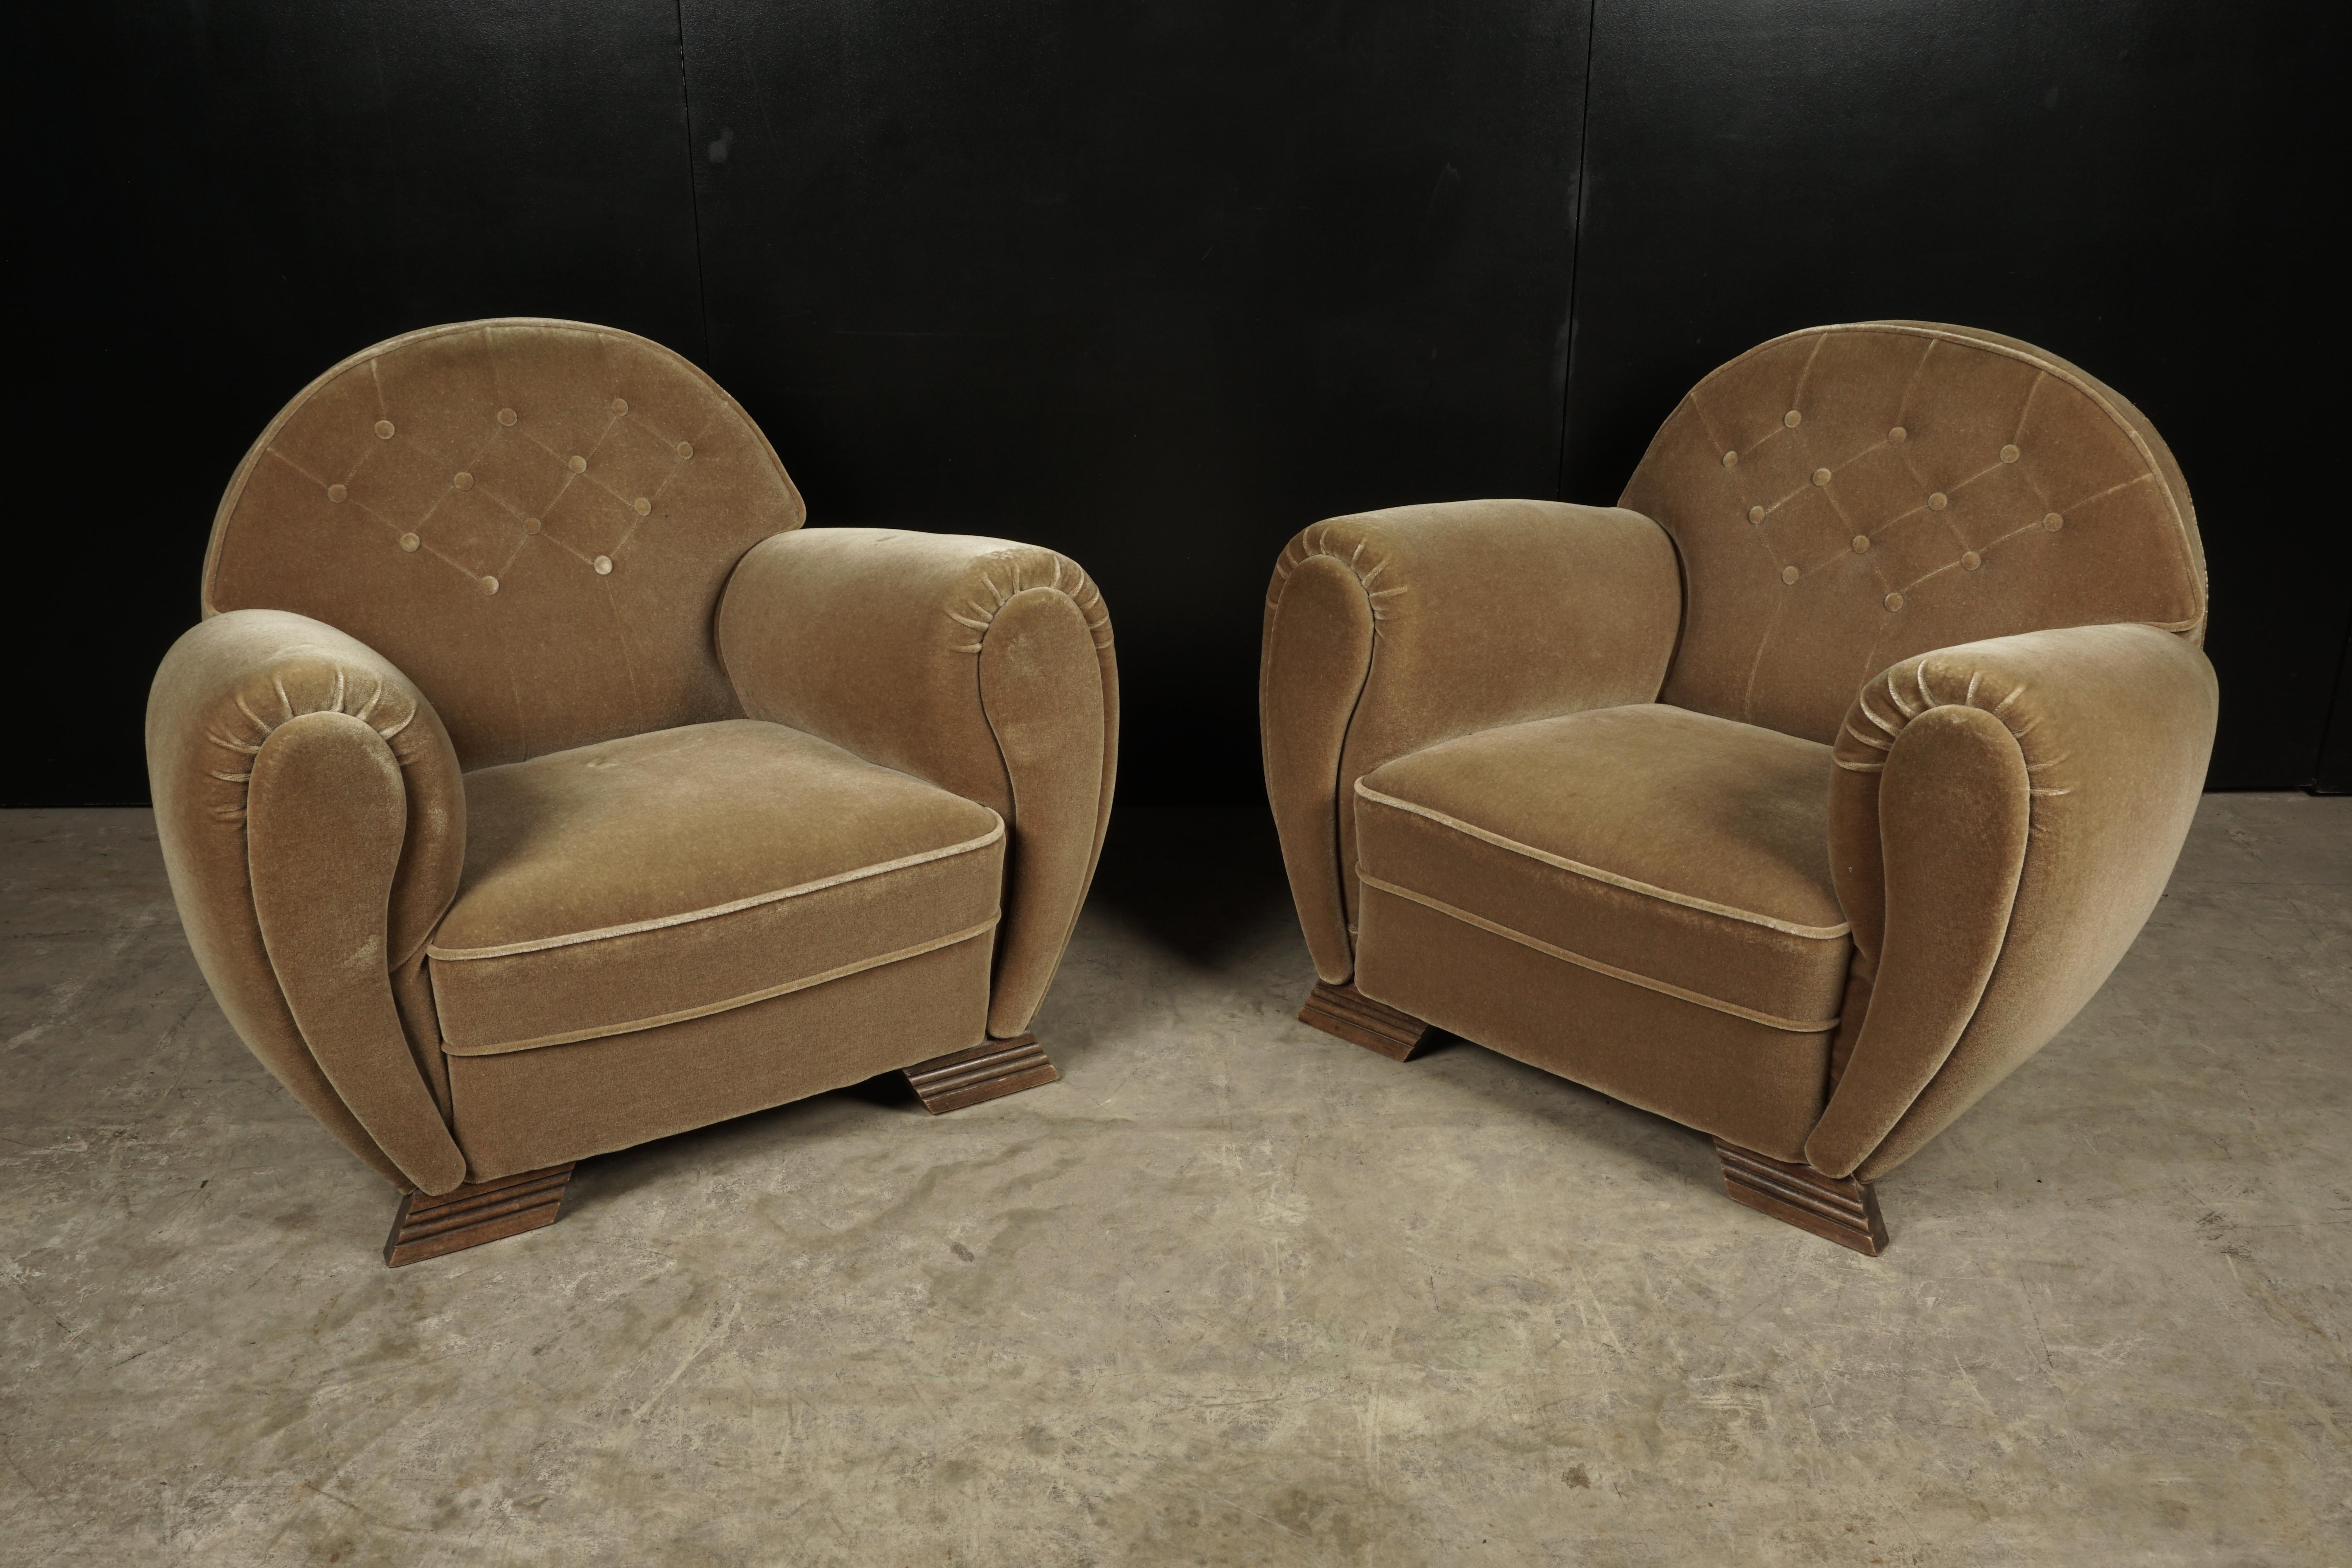 Mid-20th Century Rare Pair of Art Deco Lounge Chairs from France, circa 1950